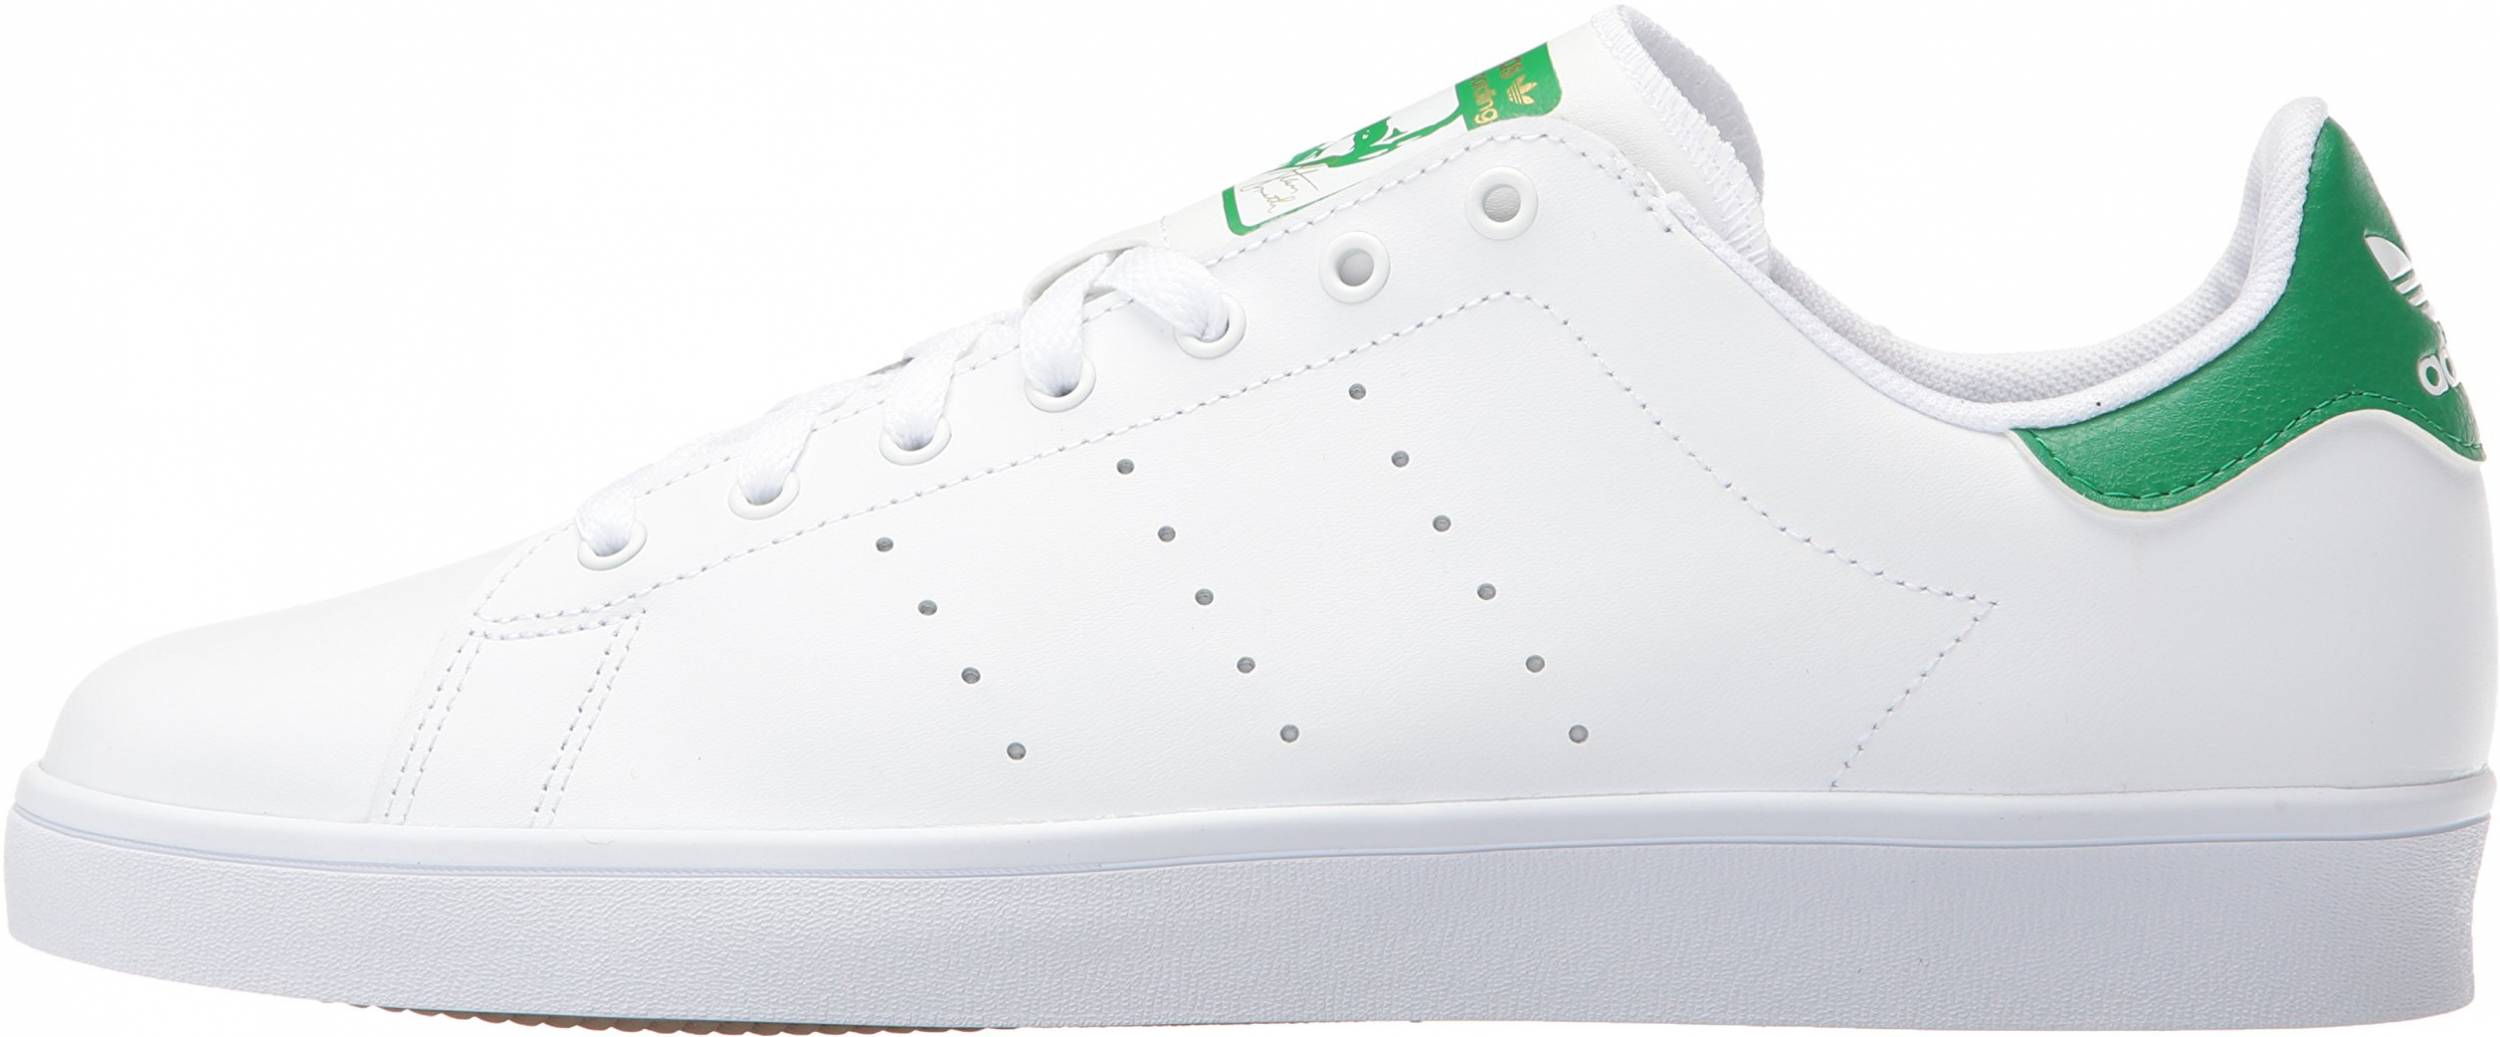 tactics banjo Airfield Adidas Stan Smith Vulc sneakers in 4 colors (only $50) | RunRepeat